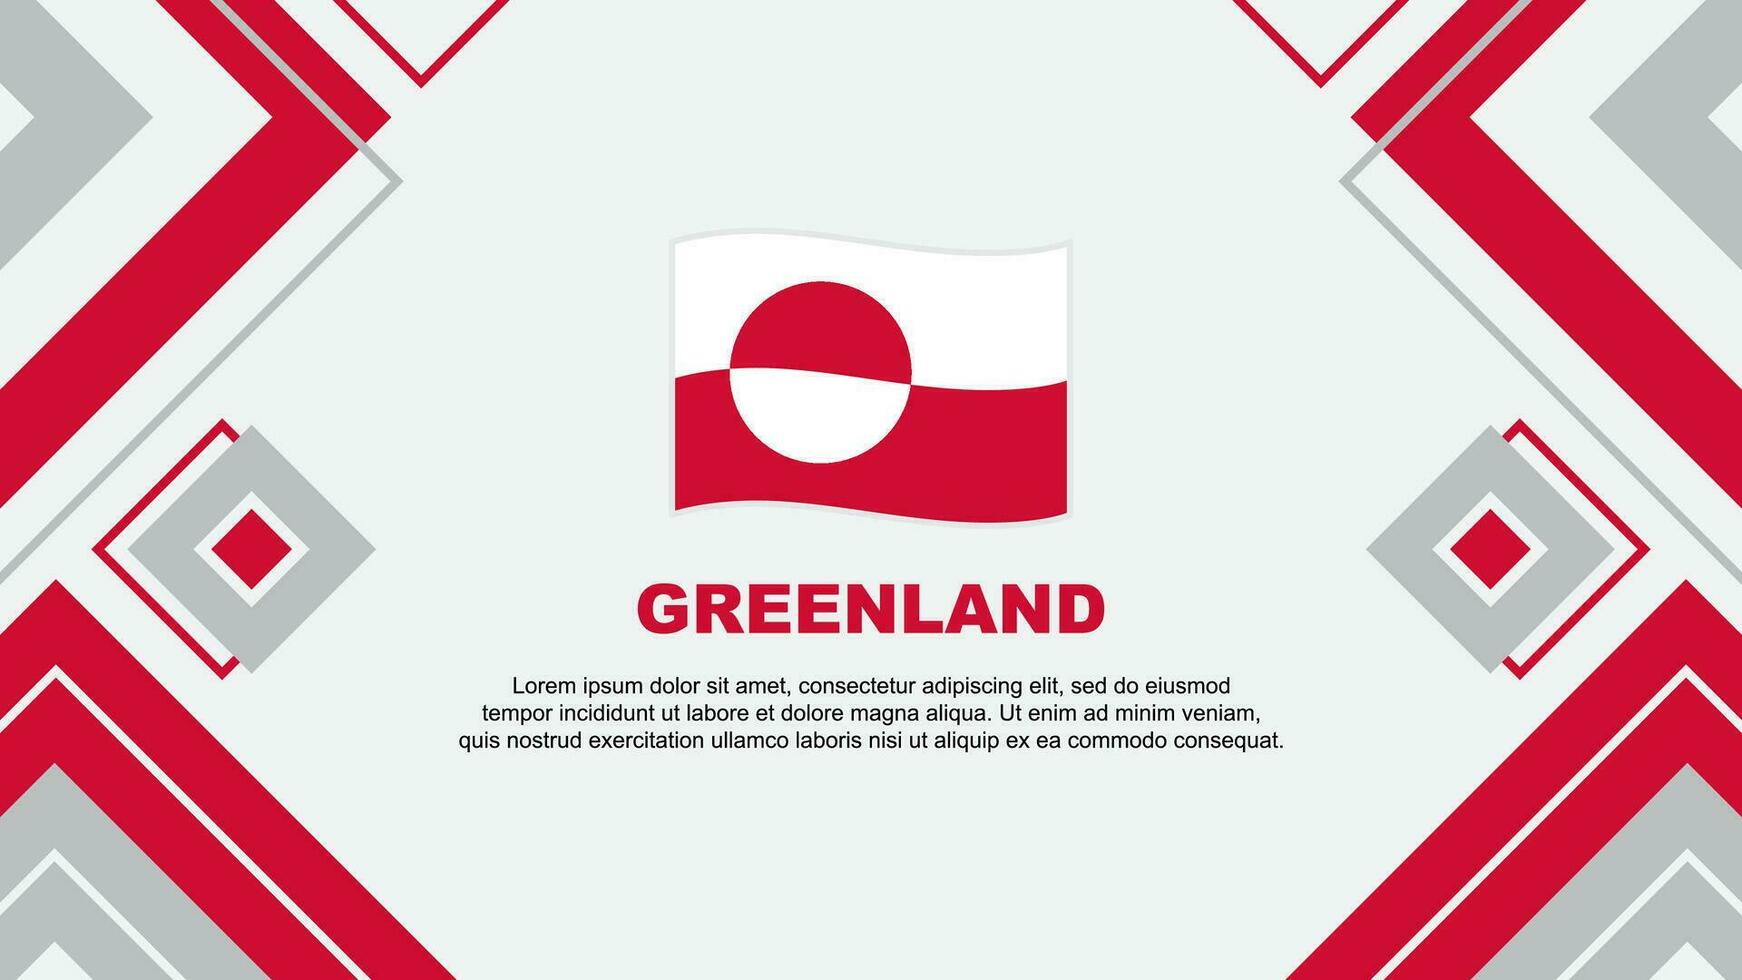 Greenland Flag Abstract Background Design Template. Greenland Independence Day Banner Wallpaper Vector Illustration. Greenland Background